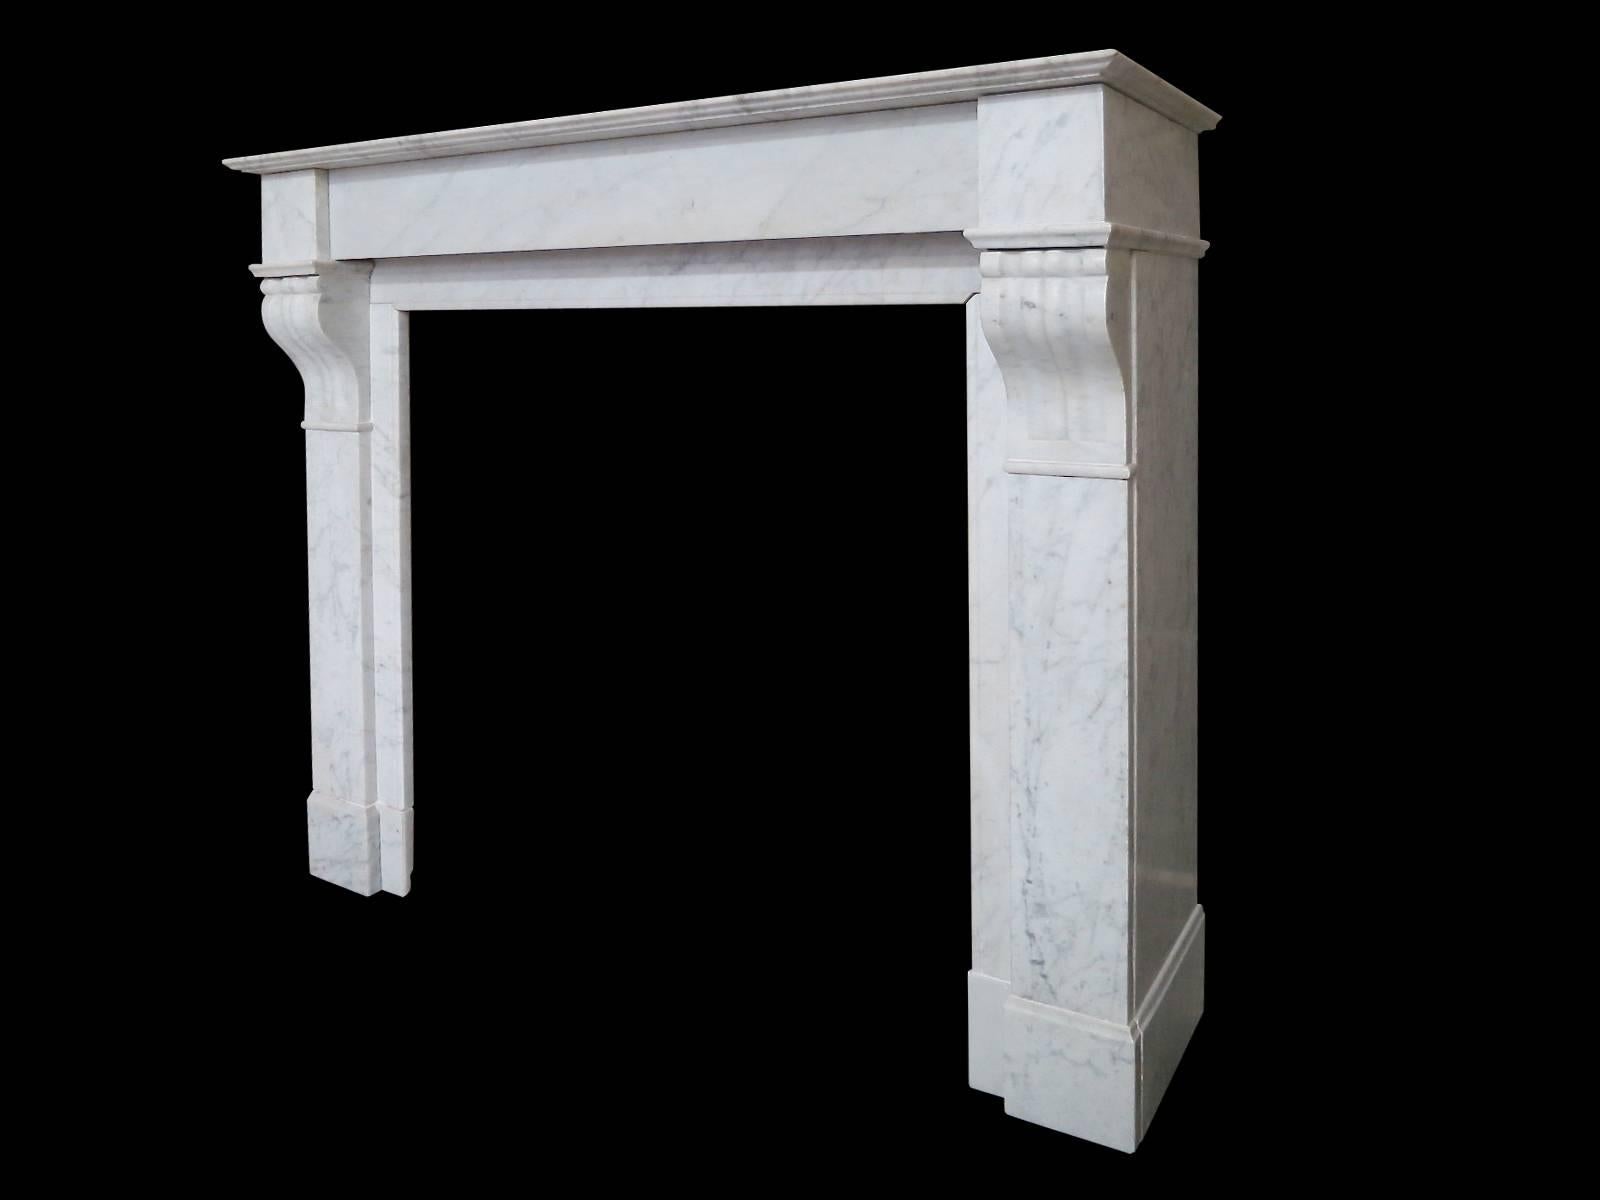 An antique French Louis XVI style fireplace in Italian Carrara marble. The plain jambs surmounted by carved corbels and plain end blocks, with a simple plain frieze and inner slips. All beneath a tiered mantel. Mid-19th century

Opening 76.5cm w x